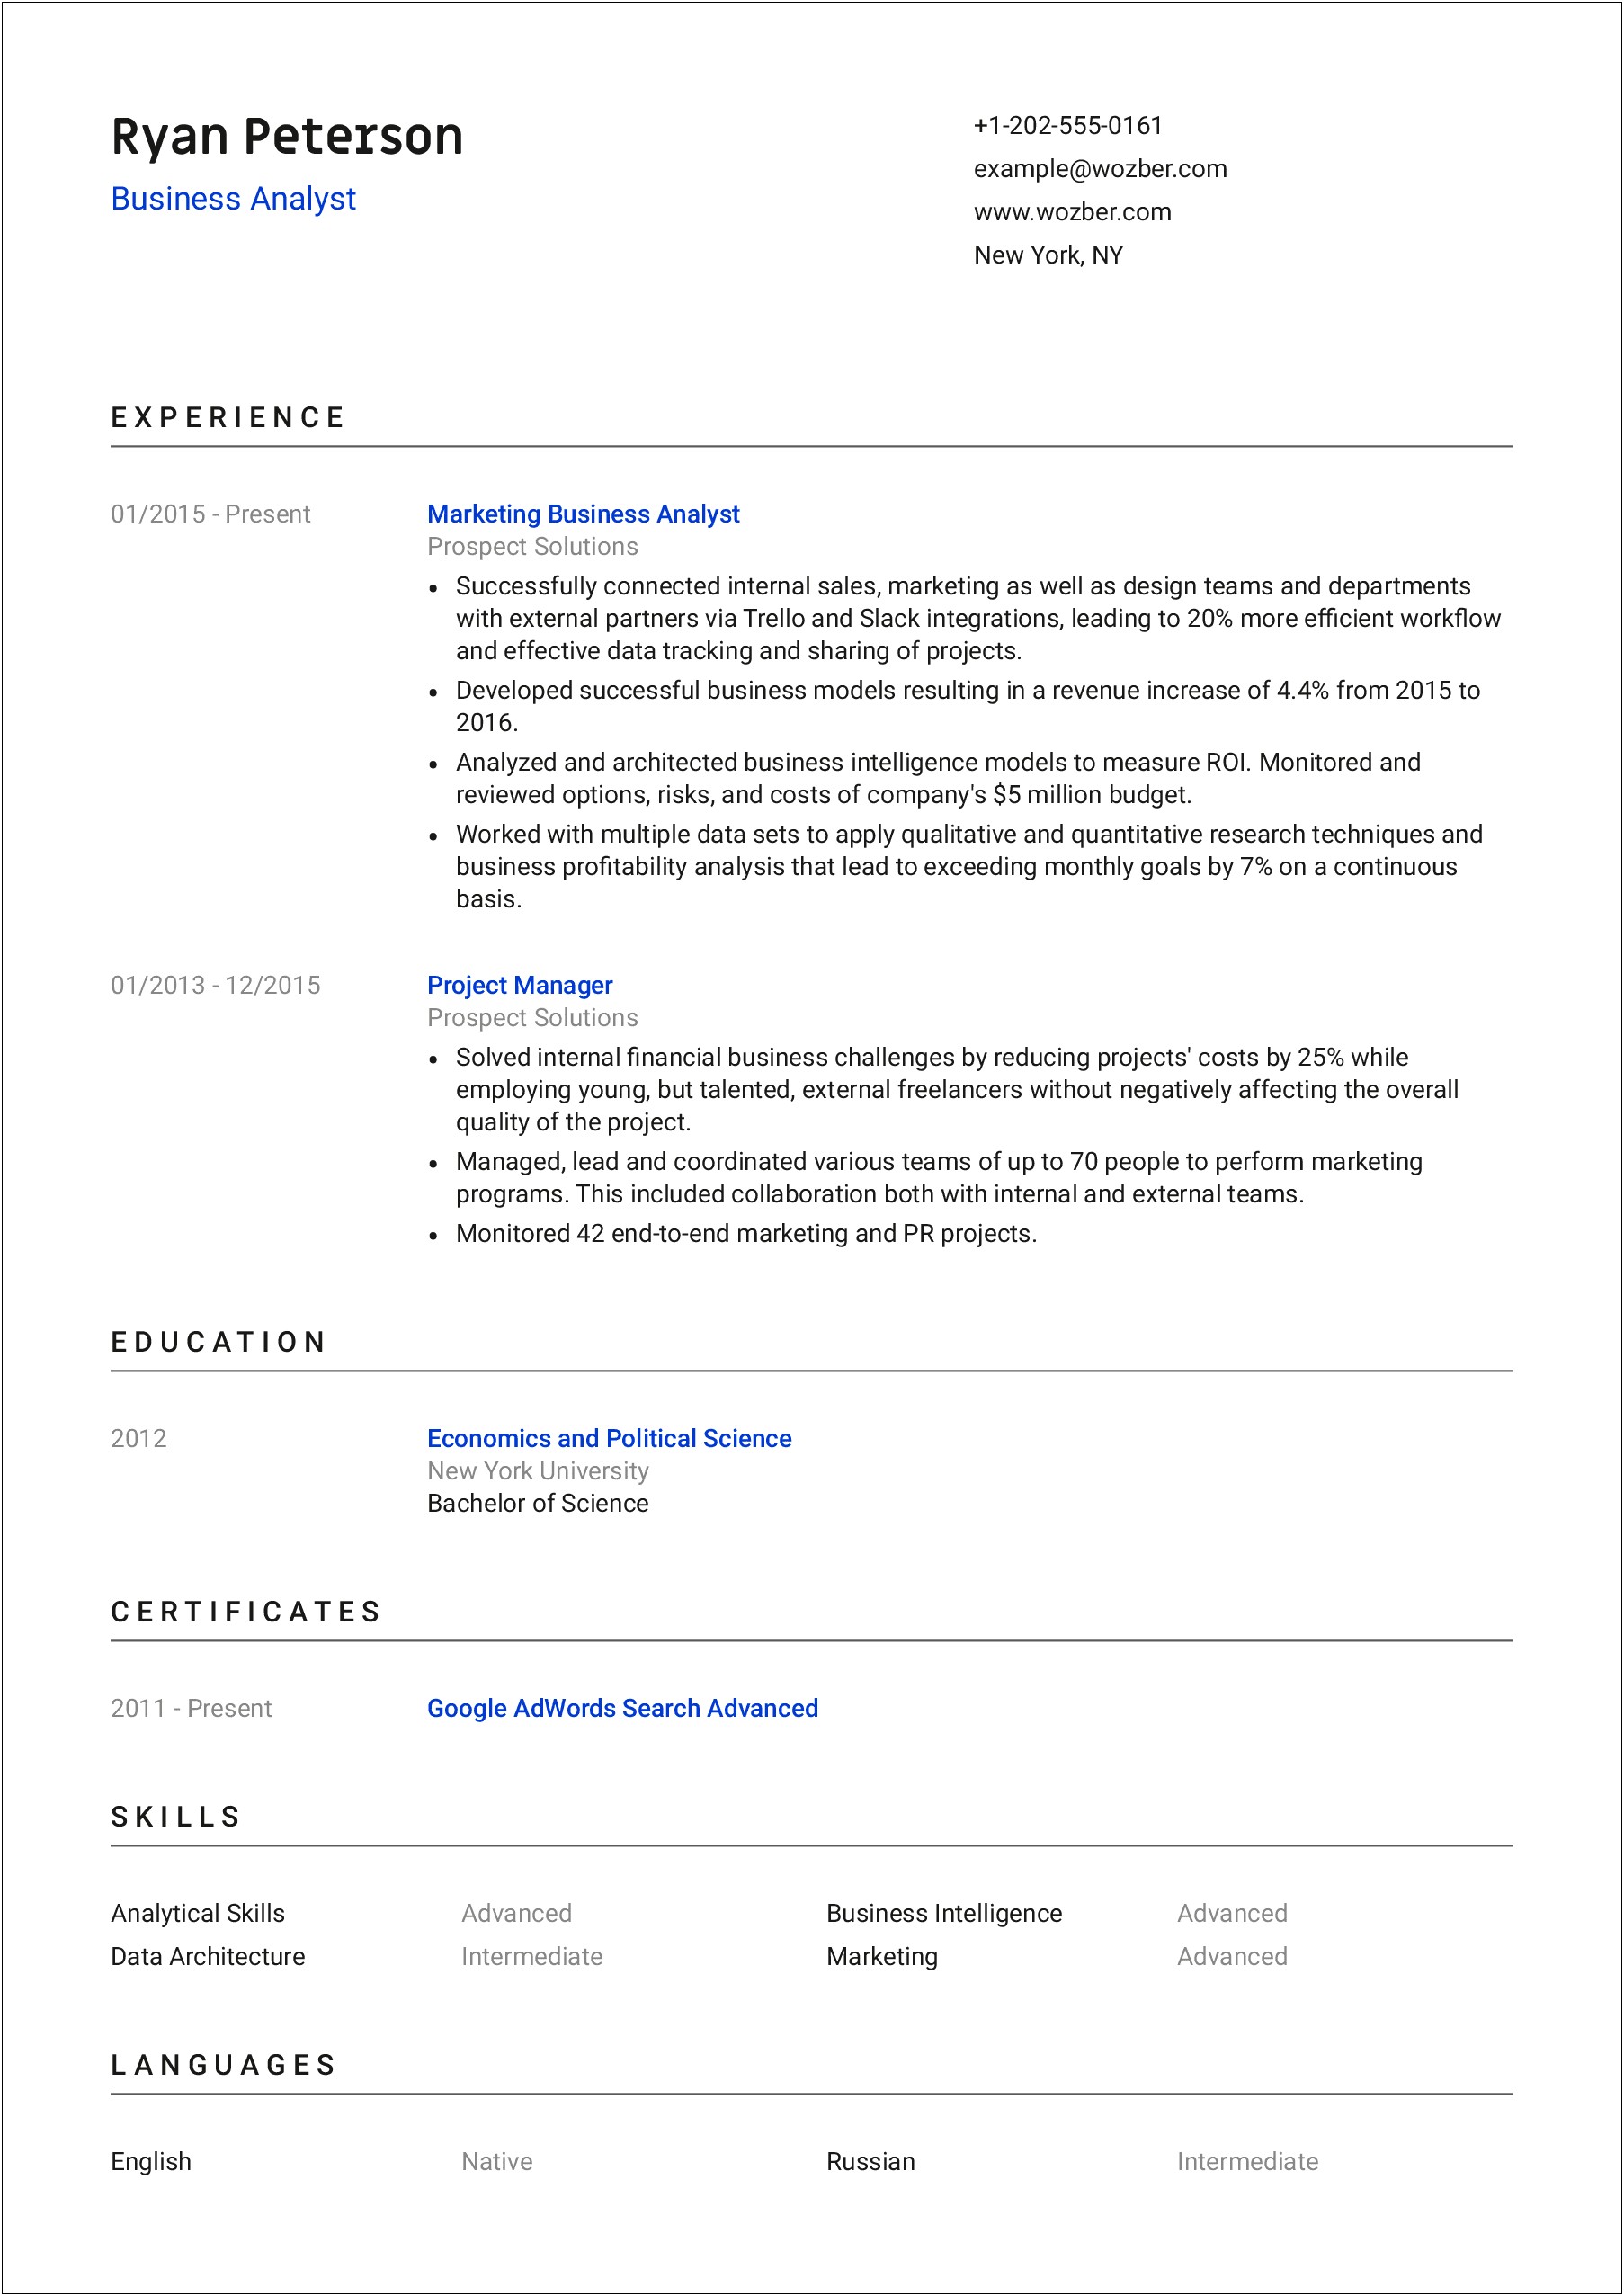 Business Analyst One Year Experience Resume